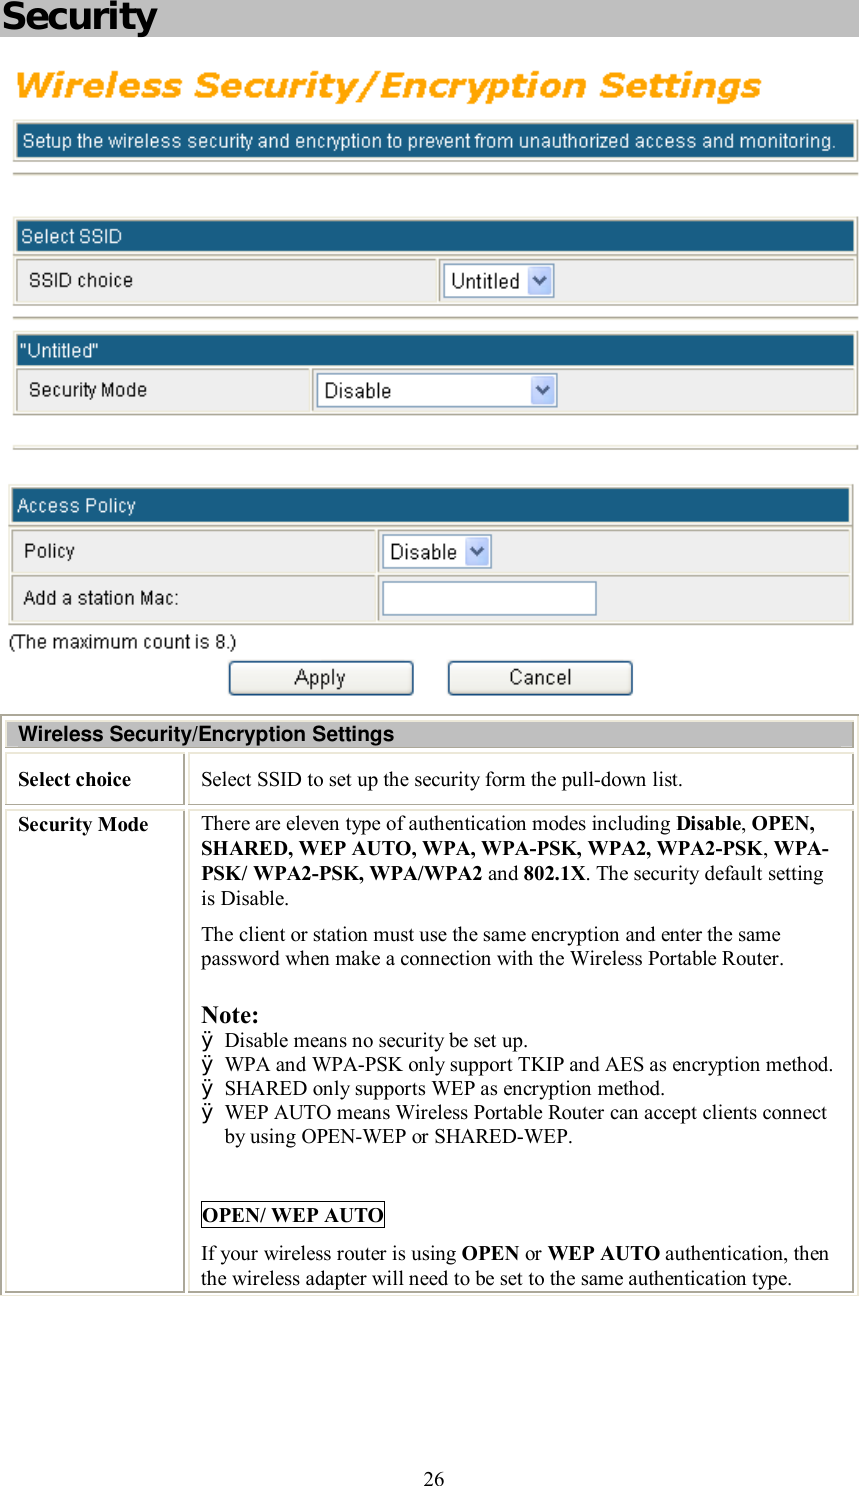    26 Security  Wireless Security/Encryption Settings Select choice  Select SSID to set up the security form the pull-down list. Security Mode  There are eleven type of authentication modes including Disable, OPEN, SHARED, WEP AUTO, WPA, WPA-PSK, WPA2, WPA2-PSK, WPA-PSK/ WPA2-PSK, WPA/WPA2 and 802.1X. The security default setting is Disable. The client or station must use the same encryption and enter the same password when make a connection with the Wireless Portable Router. Note:  Ø Disable means no security be set up. Ø WPA and WPA-PSK only support TKIP and AES as encryption method. Ø SHARED only supports WEP as encryption method. Ø WEP AUTO means Wireless Portable Router can accept clients connect by using OPEN-WEP or SHARED-WEP.  OPEN/ WEP AUTO If your wireless router is using OPEN or WEP AUTO authentication, then the wireless adapter will need to be set to the same authentication type.  